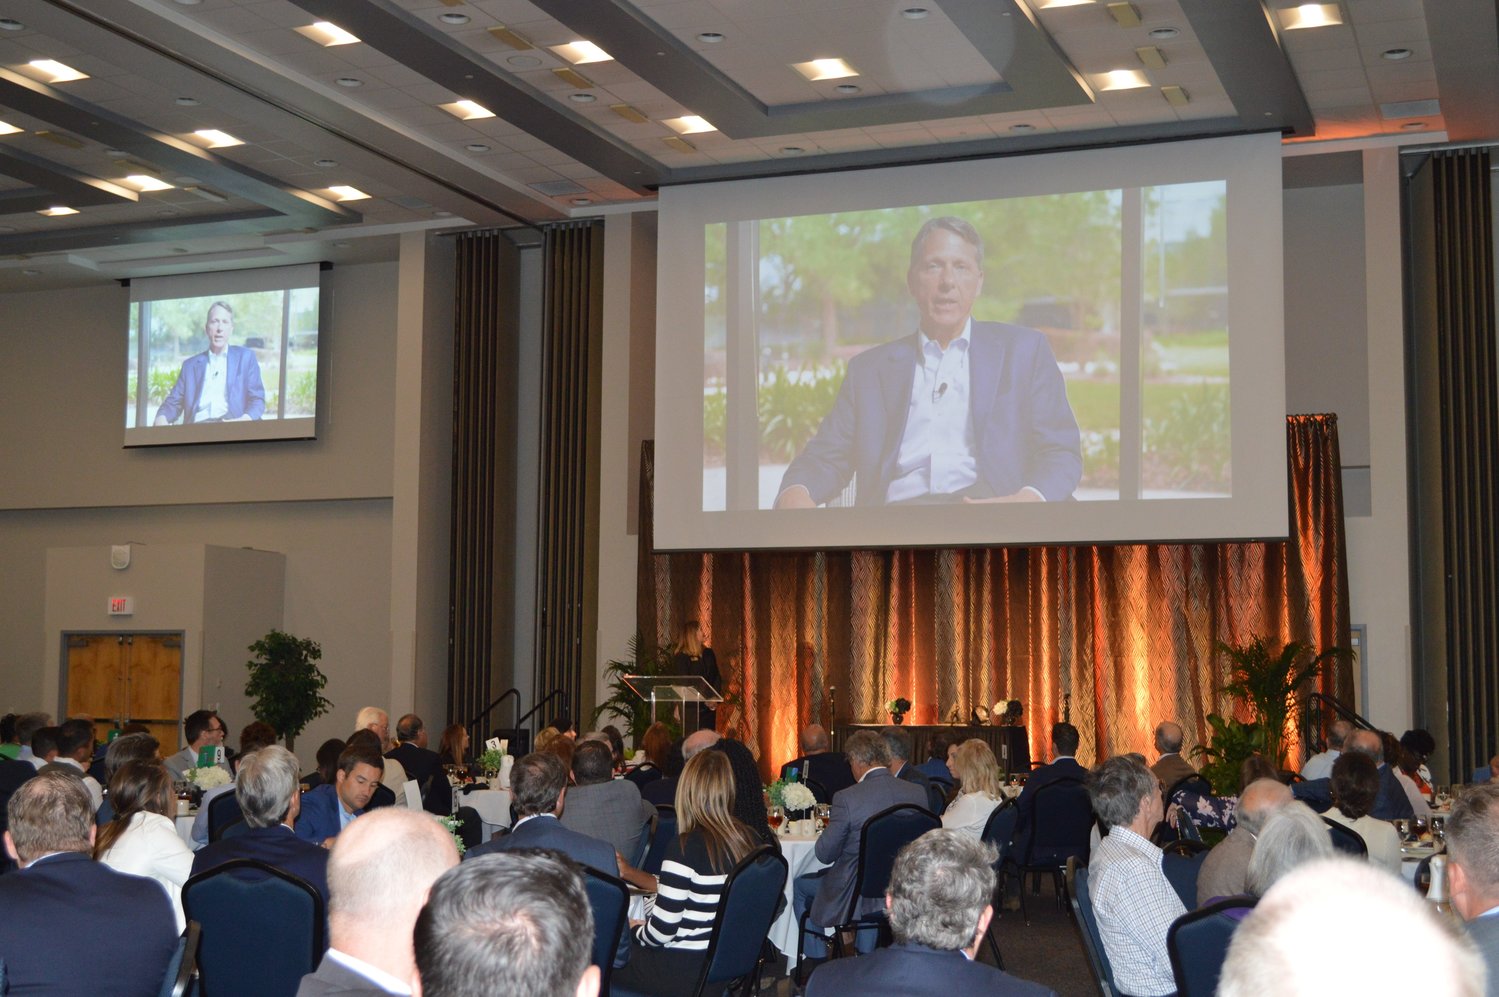 JA of North Florida Hall of Fame inductee Charlie Kauffman speaks via video to those attending the Junior Achievement of North Florida’s 2022 Hall of Fame Luncheon.